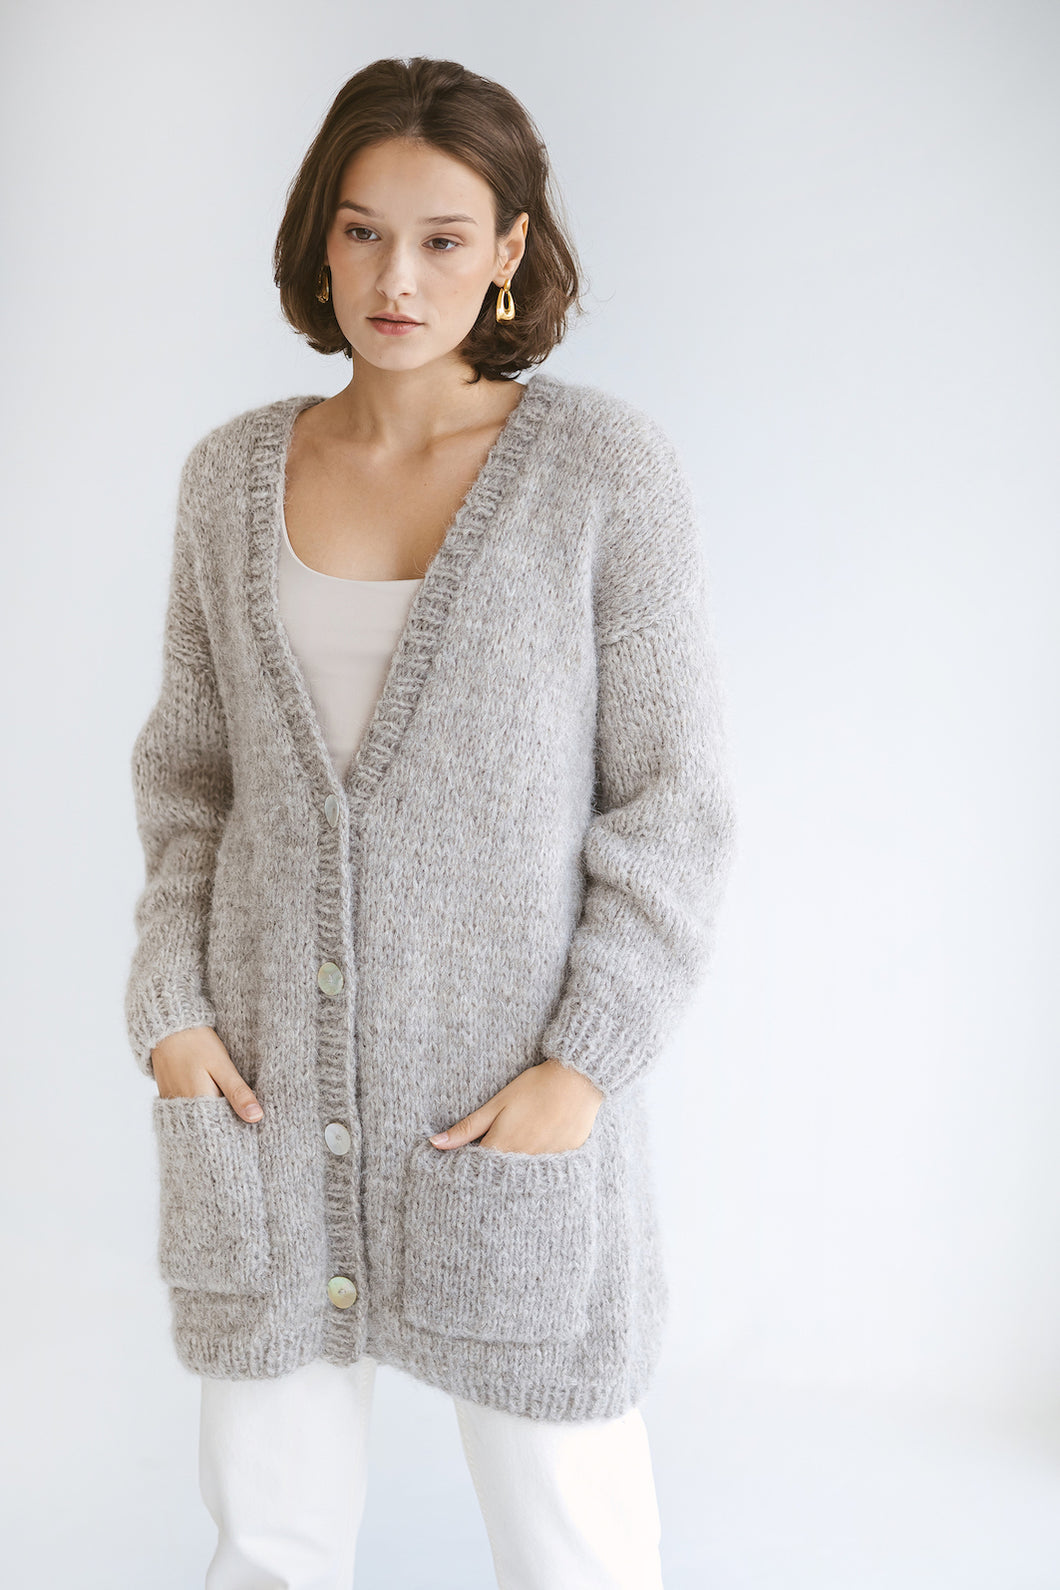 Light gray cardigan with pockets and buttons